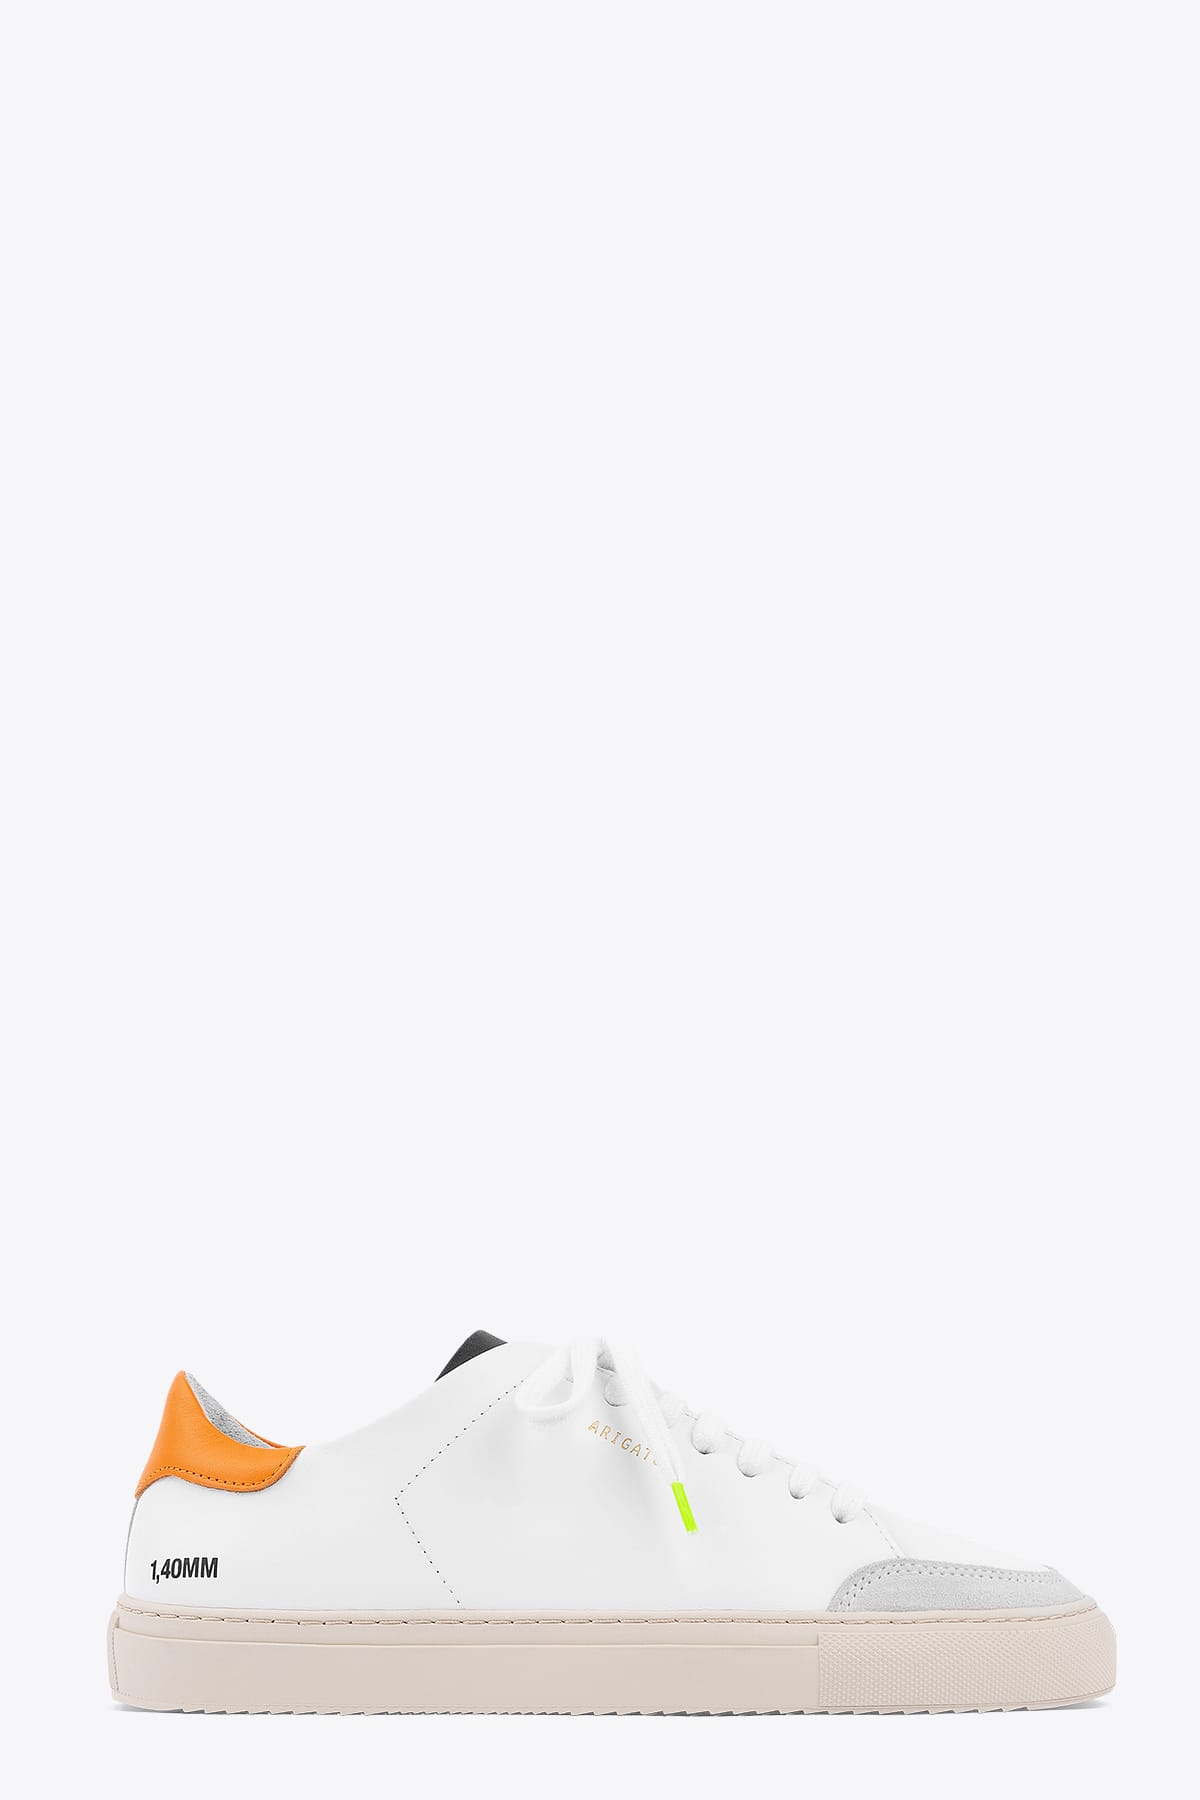 Axel Arigato Clean 90 Triple White leather low top lace-up sneaker with multicolor detail- Clean 90 triple